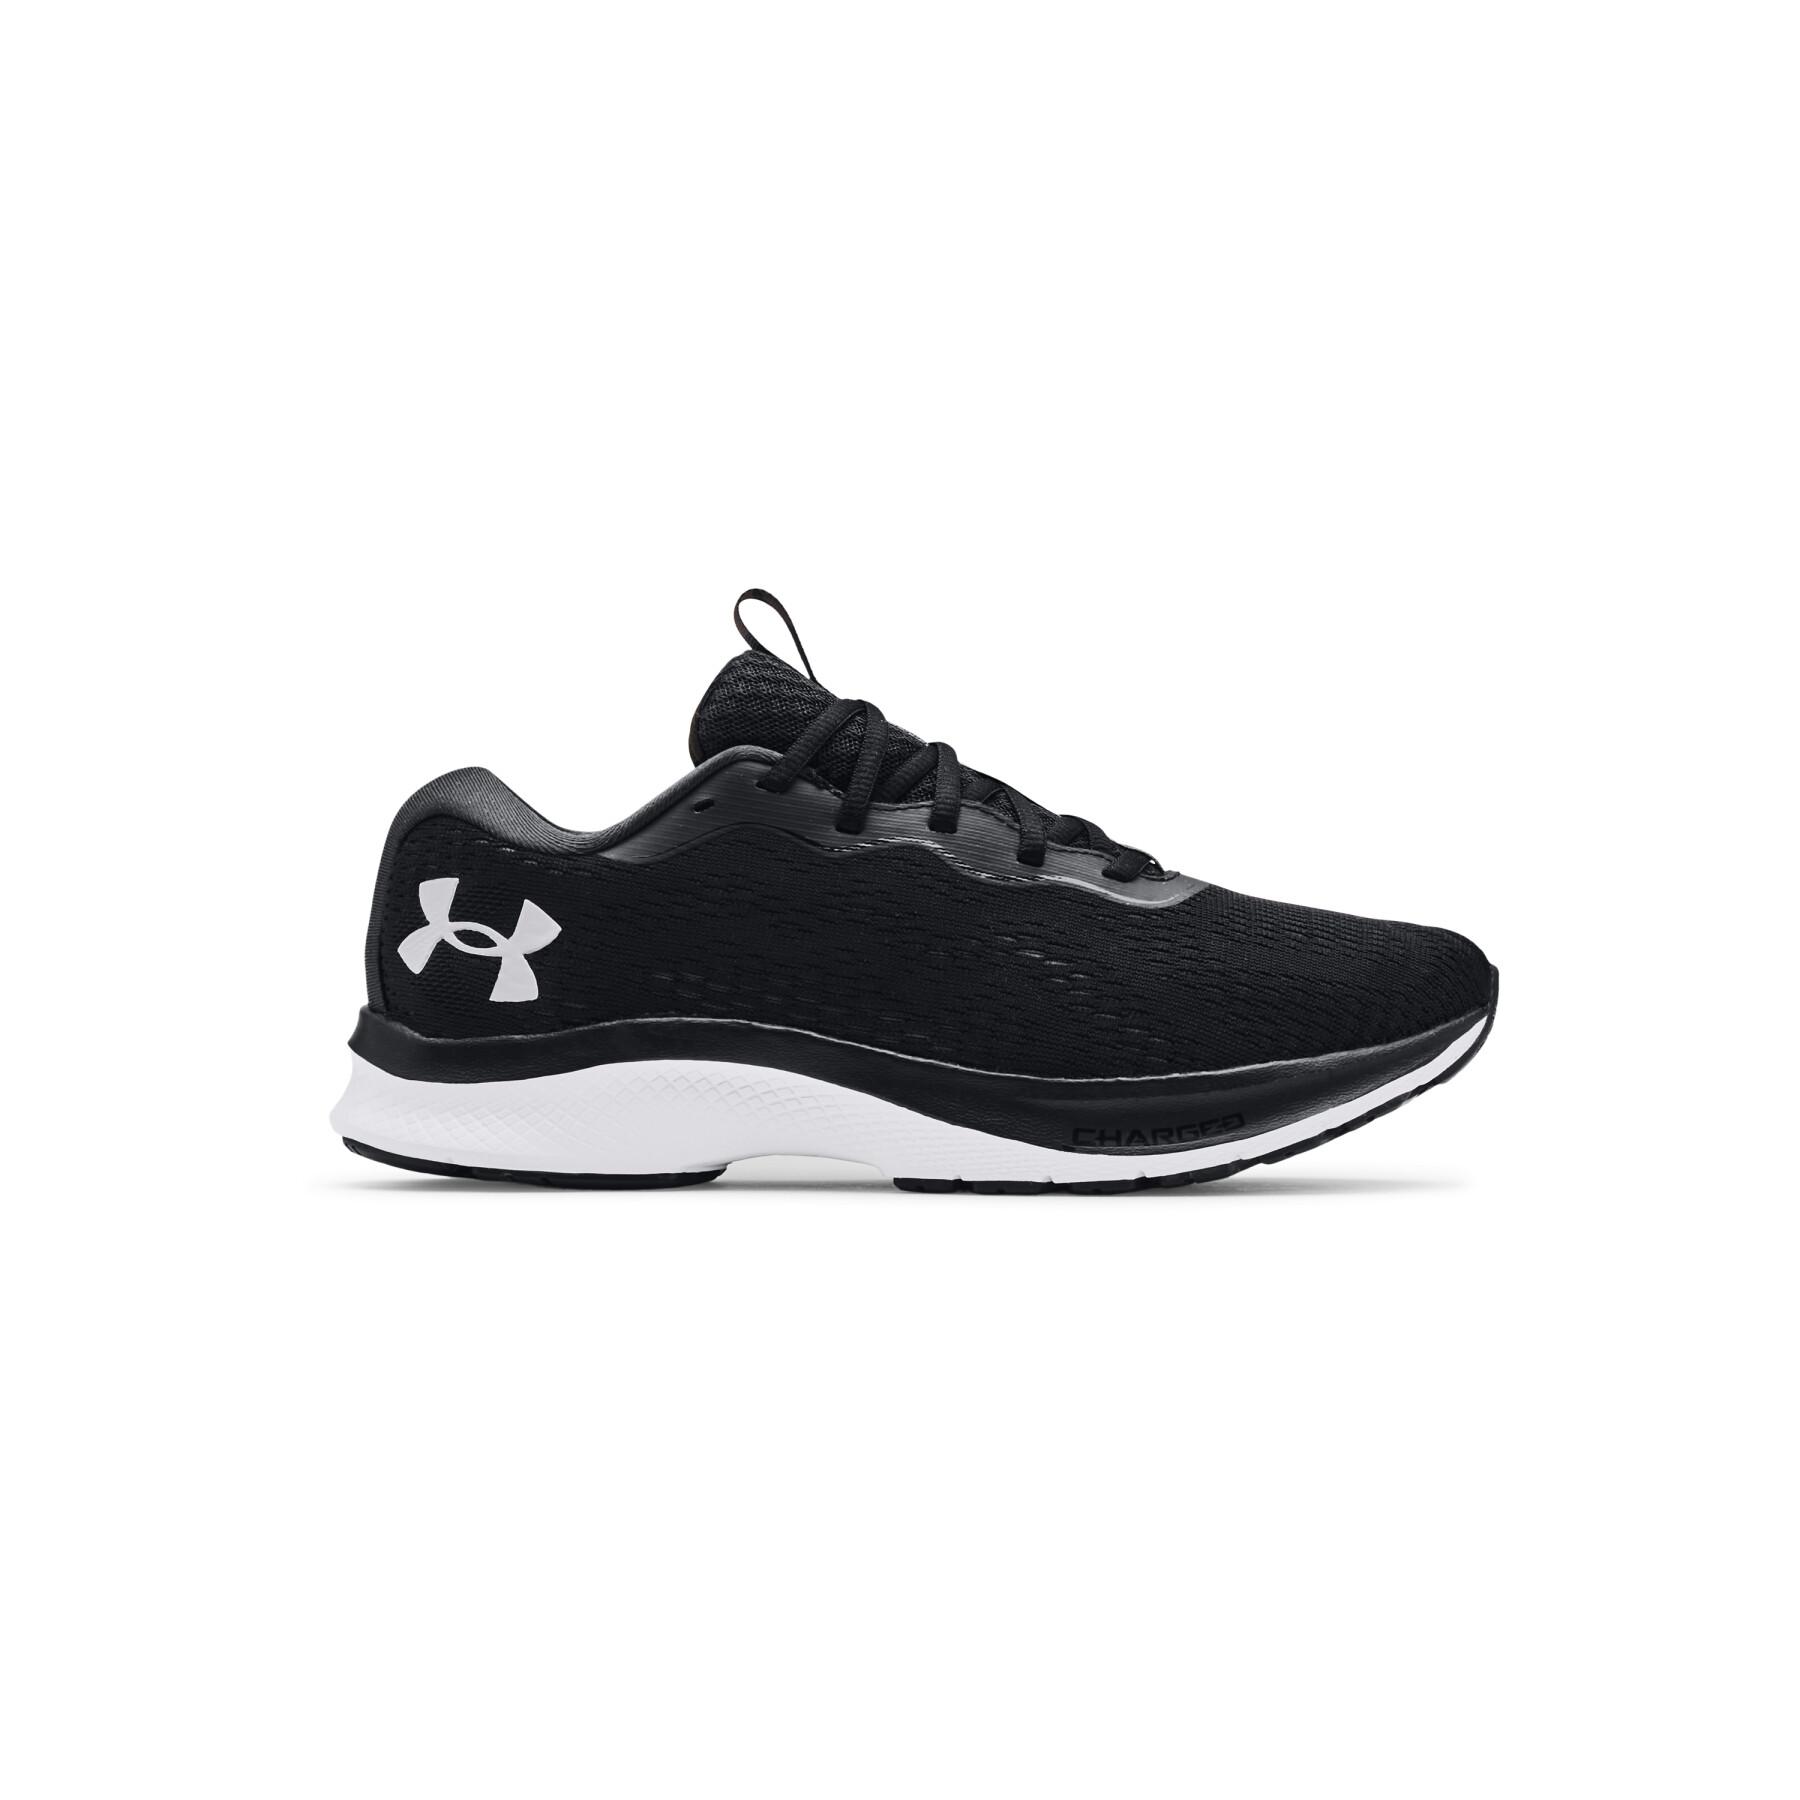 Zapatillas de running para mujer Under Armour Charged Bandit 7